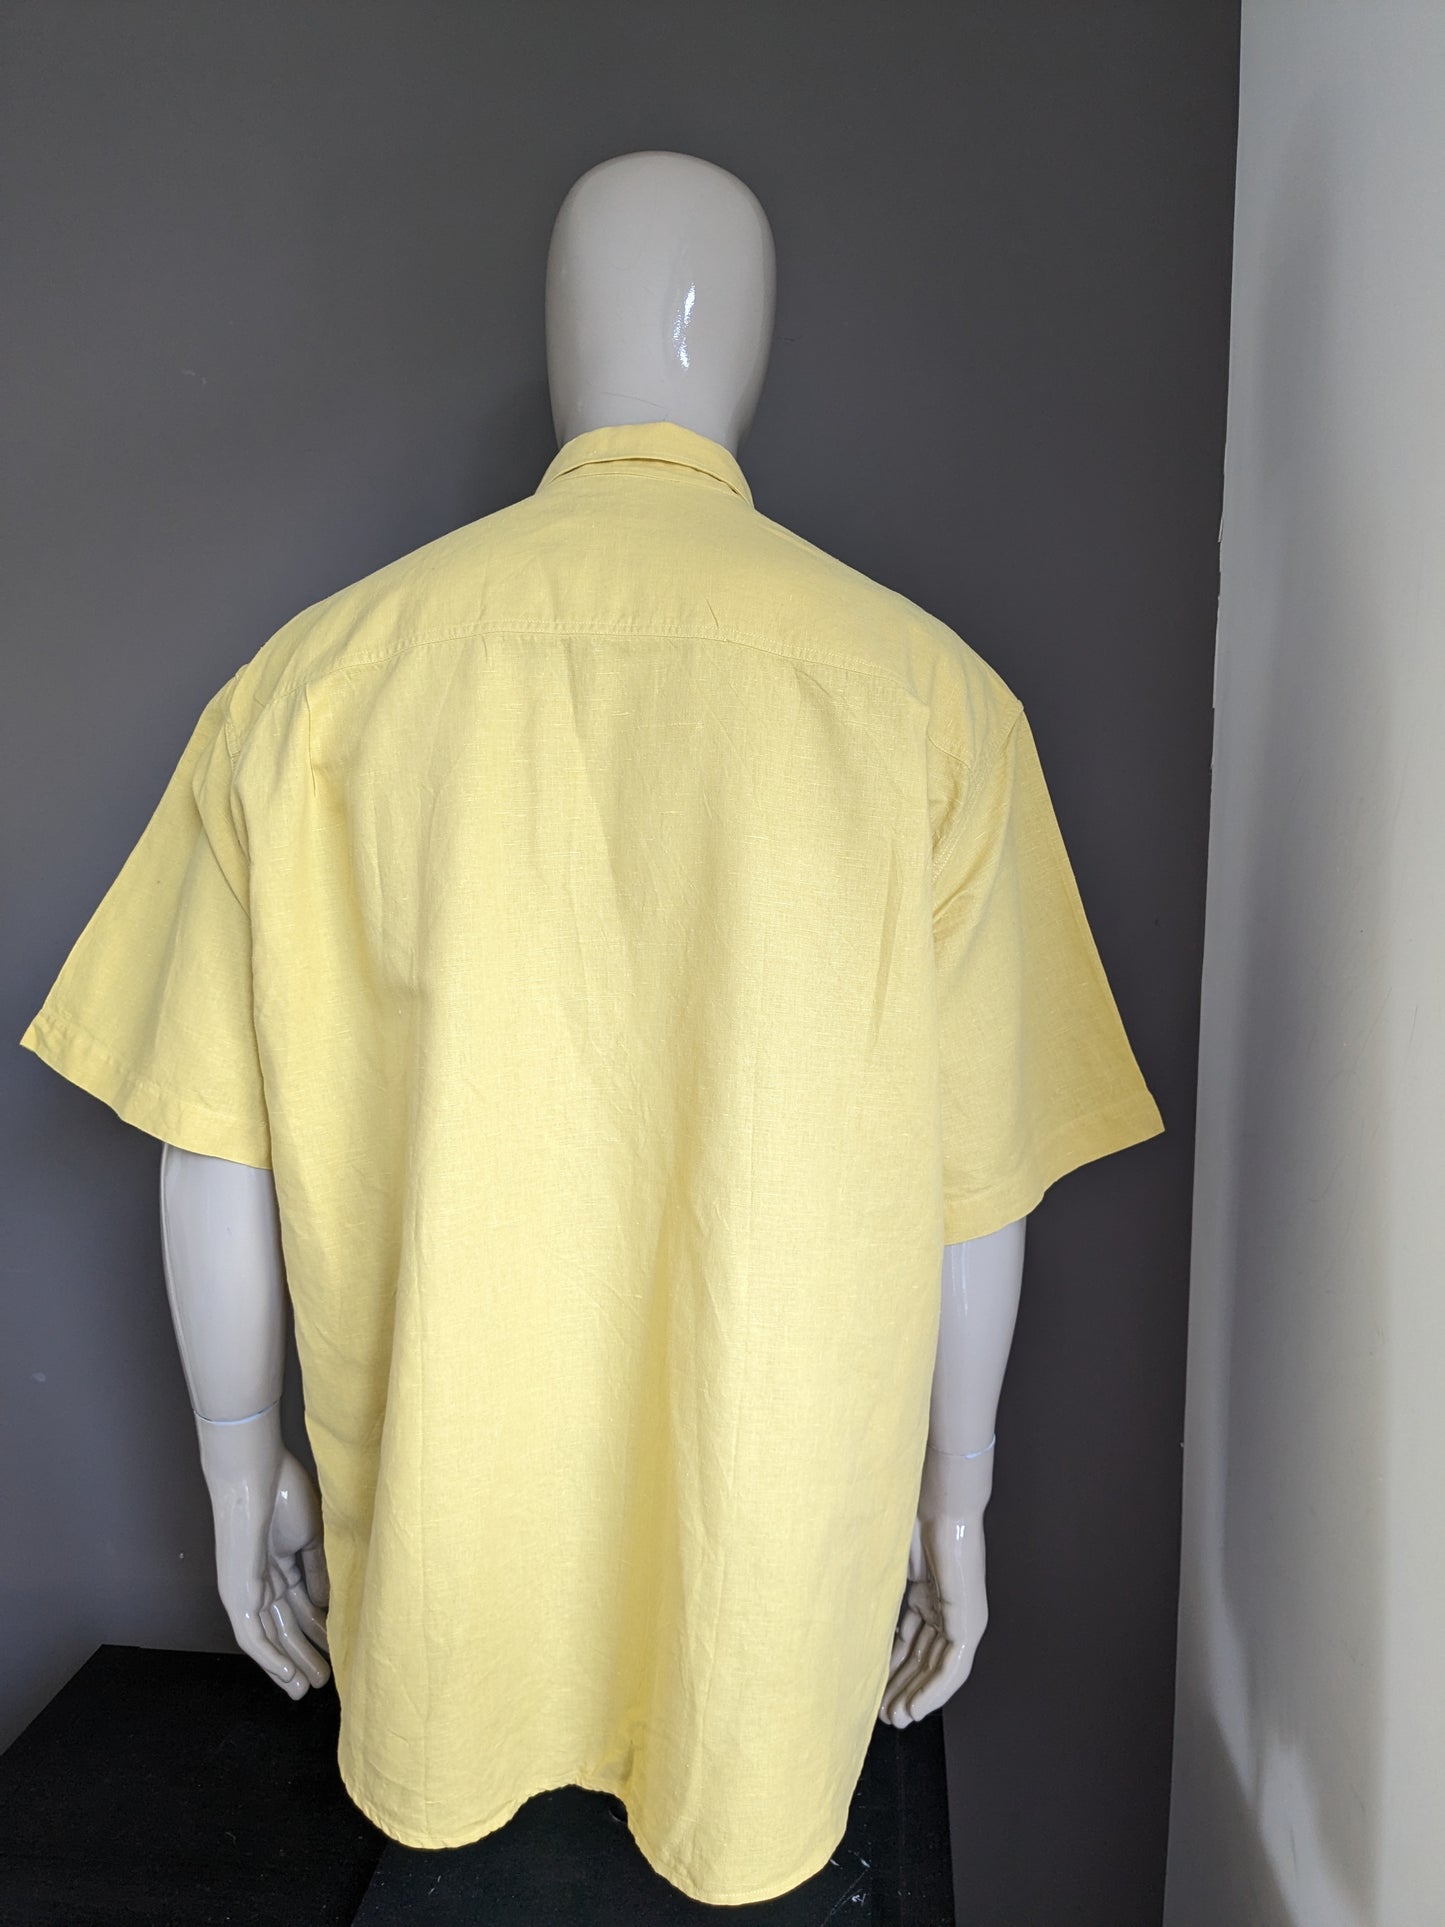 Vintage Pohland Exklusiv Linen Shirt with larger buttons. Yellow colored. Size 2XL / XXL.